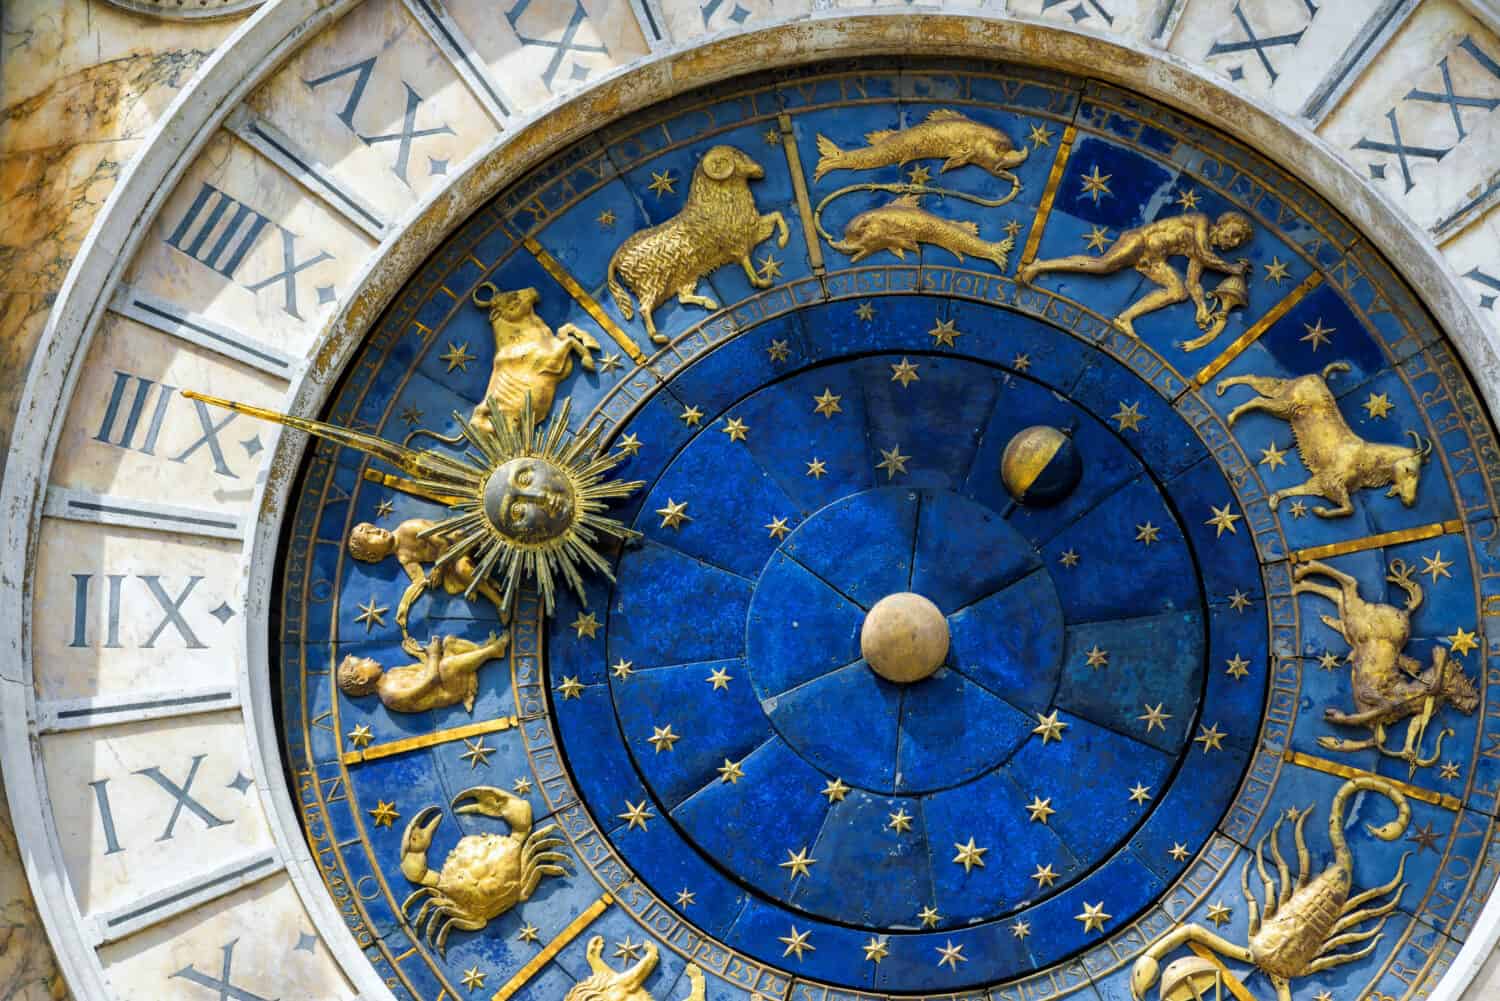 Zodiac signs on Ancient clock Torre dell'Orologio in Piazza San Marco, Venice, Italy, Europe. Detail of astrological vintage clock in old Venice city center close-up. It is nice historical landmark.